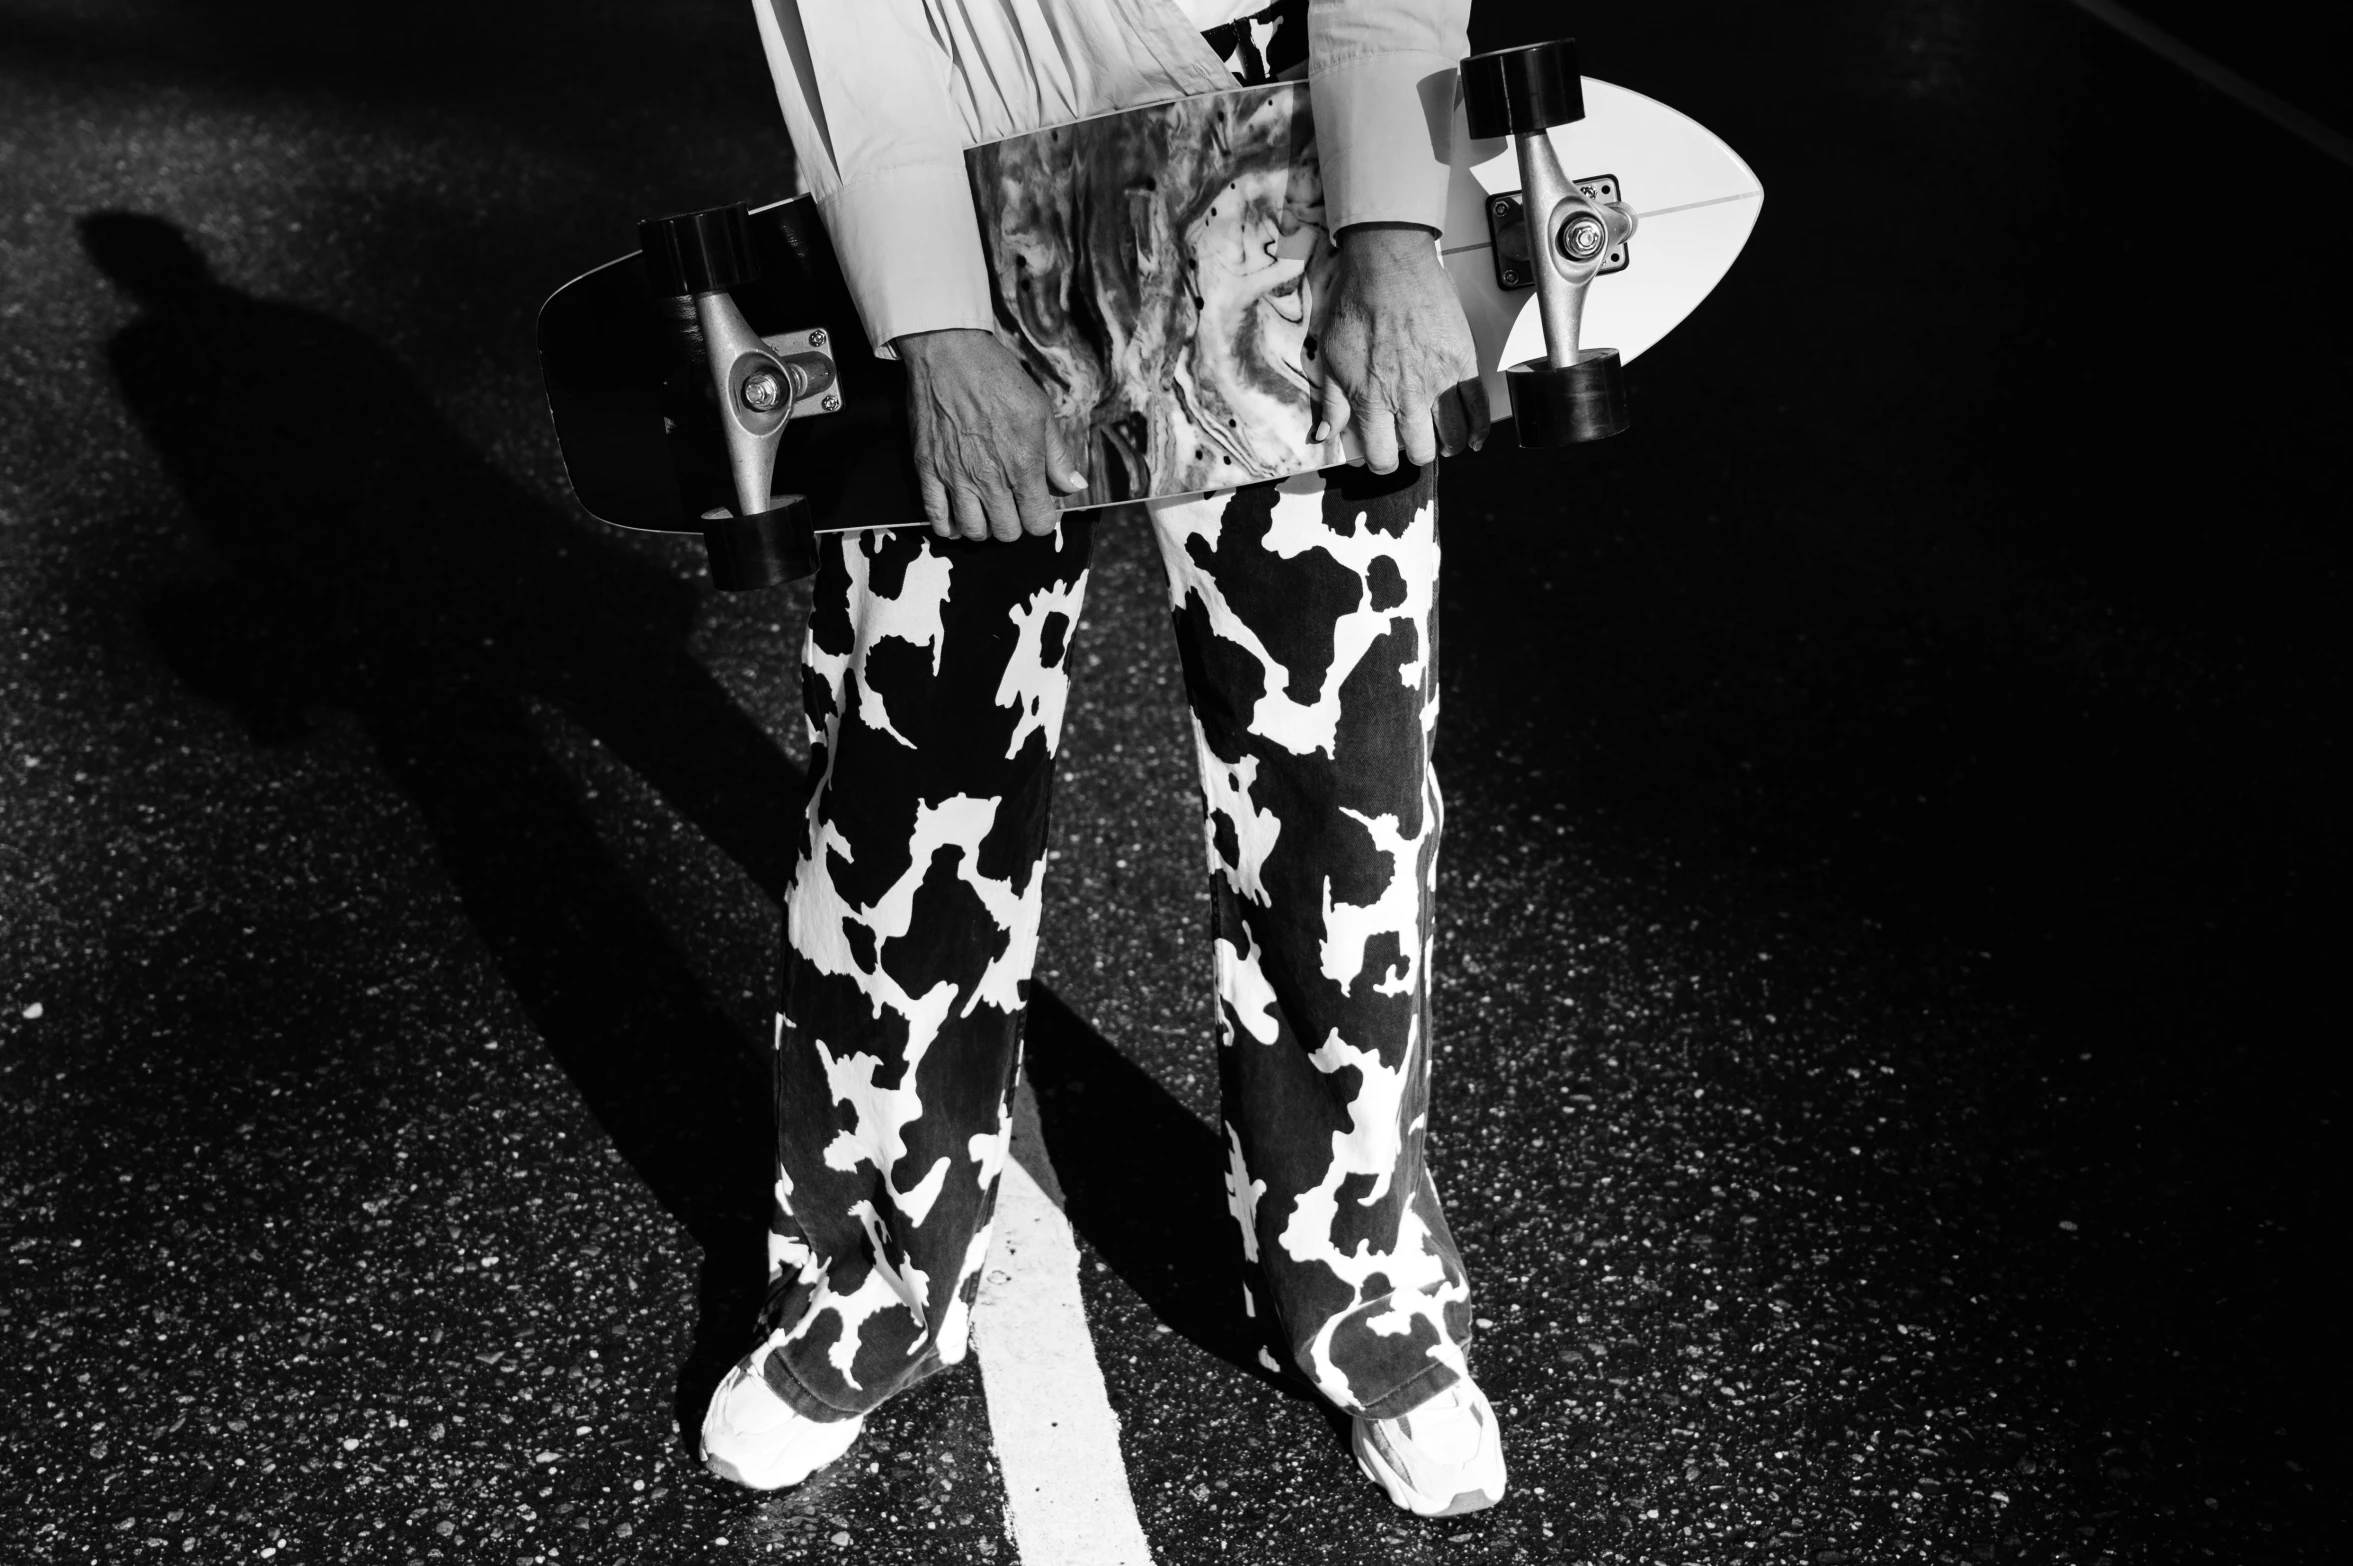 a black and white photo of a person holding a skateboard, a black and white photo, by Maurycy Gottlieb, cow, pants, 2020, photo from vogue magazine